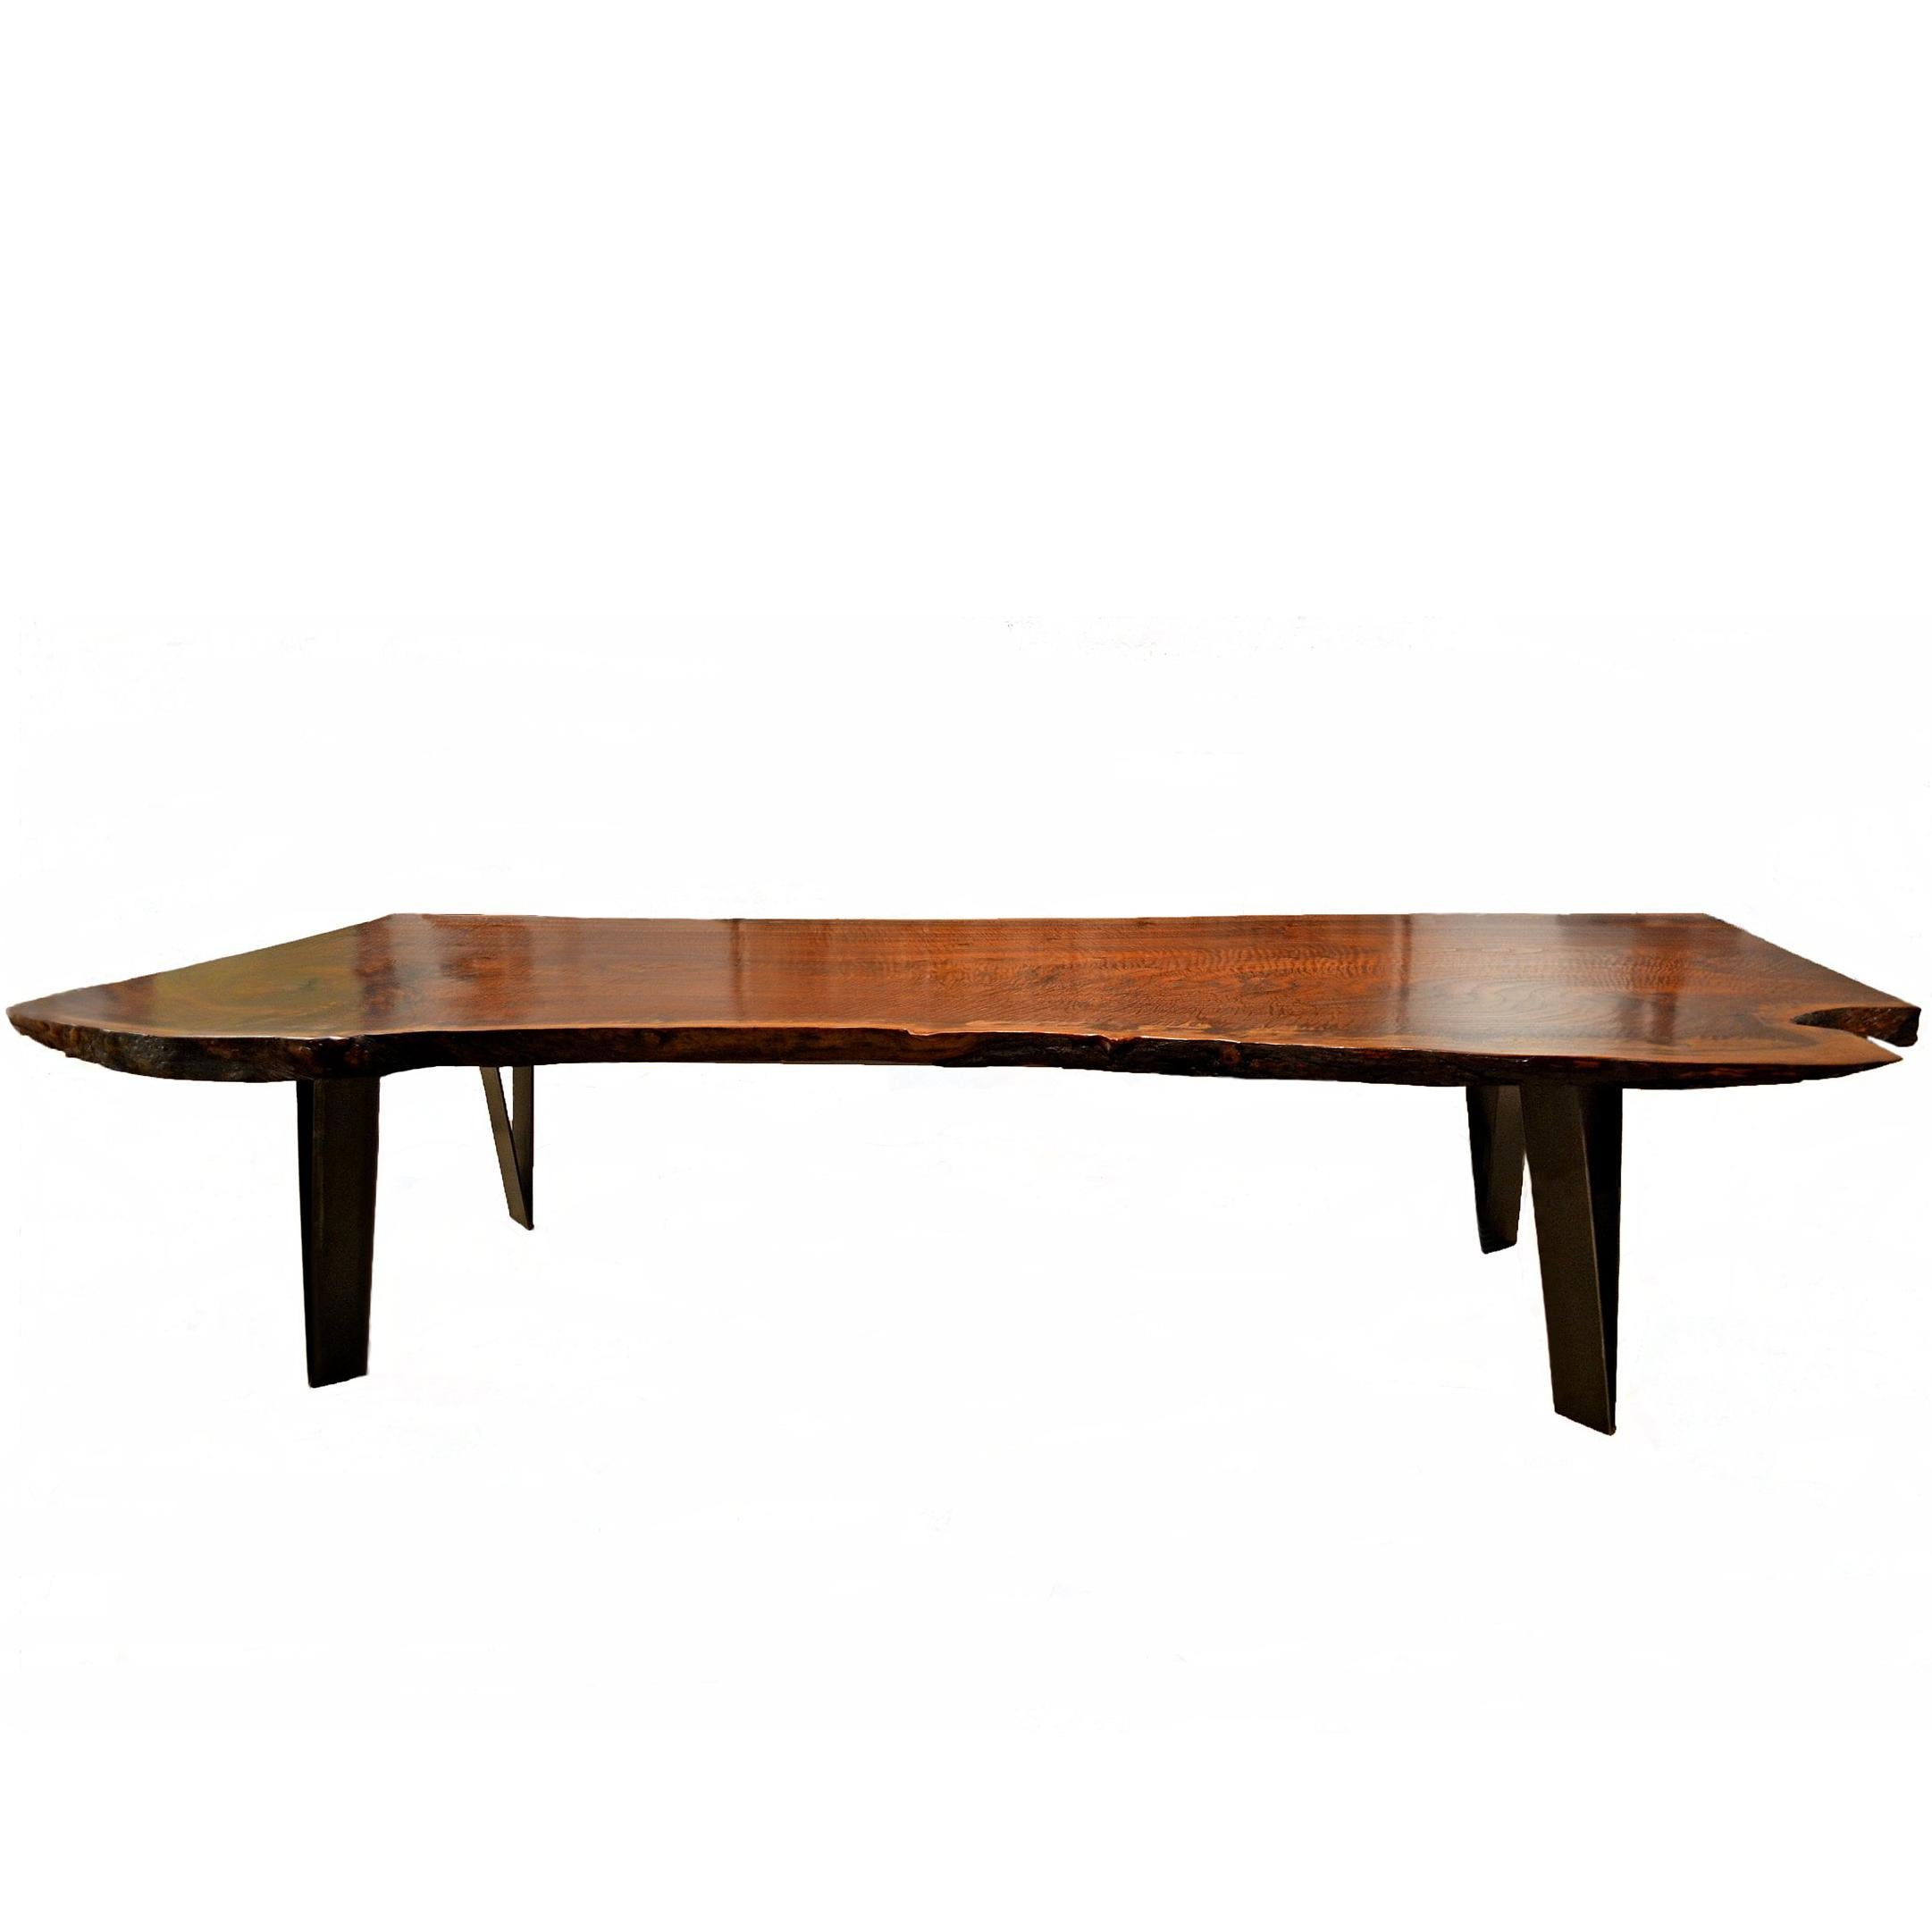 Claro Walnut Slab Dining Table with Steel Legs by Artist Charles Green For Sale